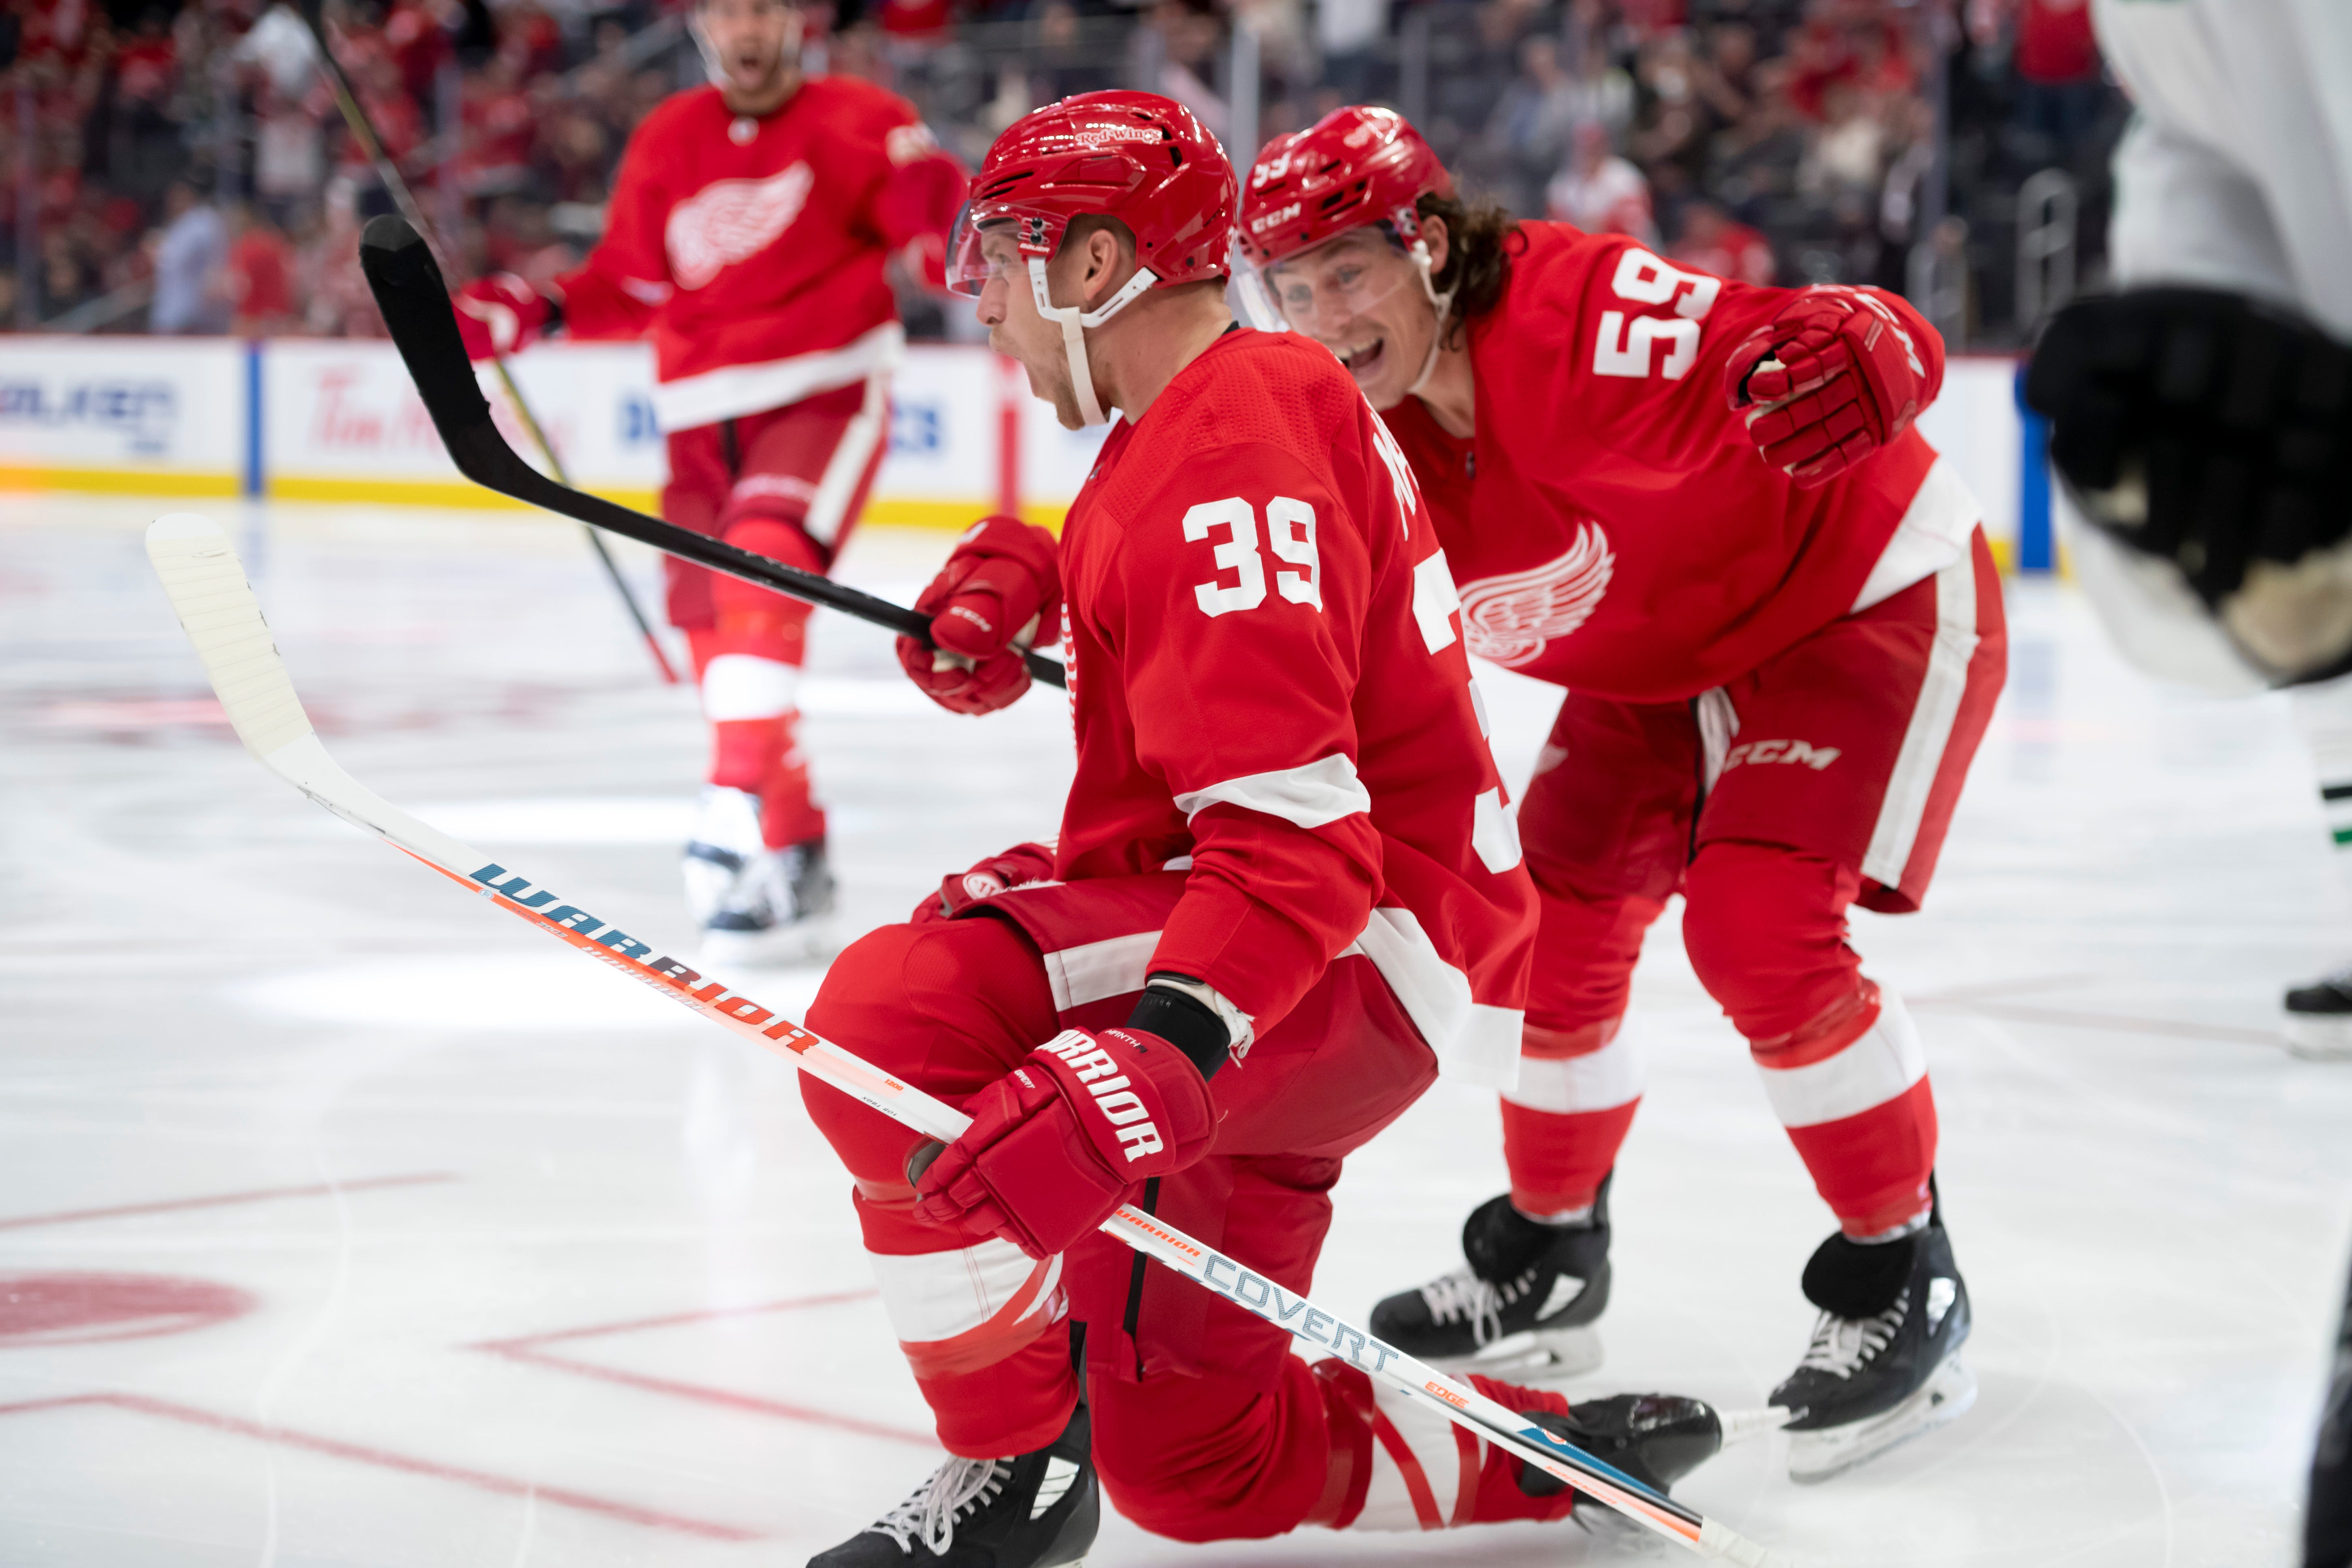 Detroit right wing Anthony Mantha (39) celebrates with Detroit left wing Tyler Bertuzzi after scoring his third goal of the game in the third period.